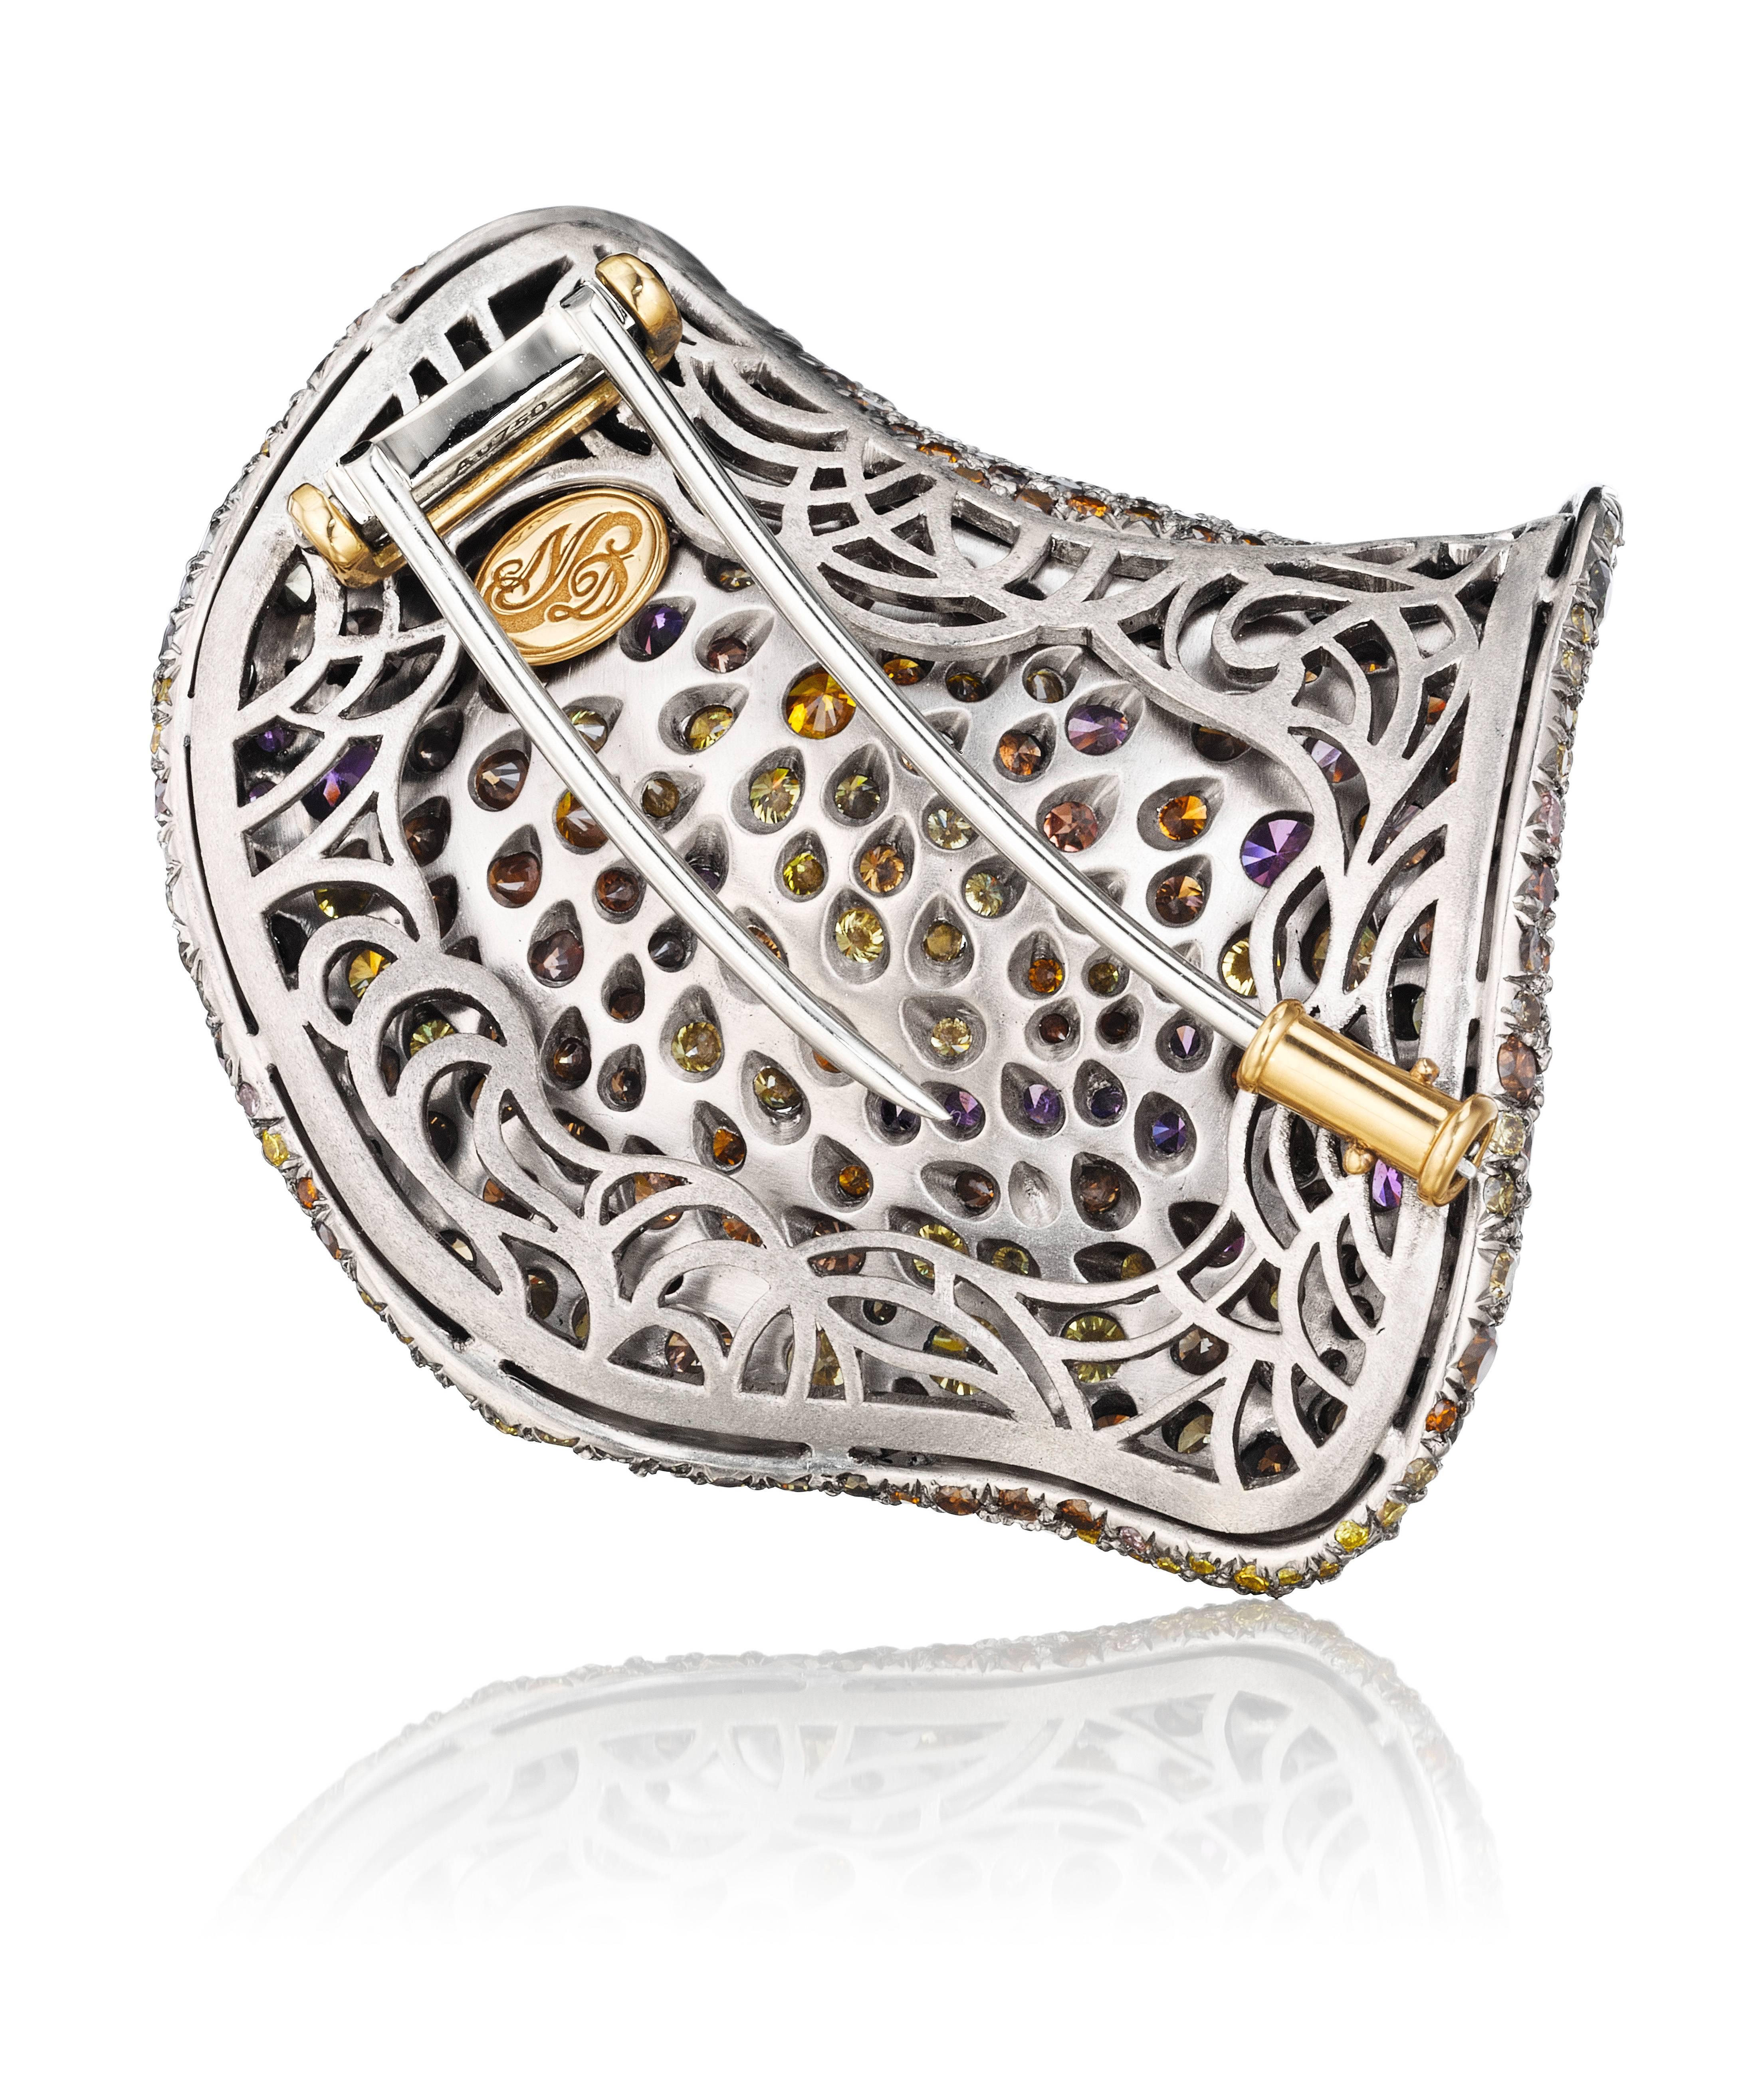 A mysterious petal brooch that glows and comes to life in subdued light. 18K white gold set with approximately 675 stones consisting of mainly olive, yellow, fancy orangey-brown, pink, and white diamonds which are complimented by multicolored